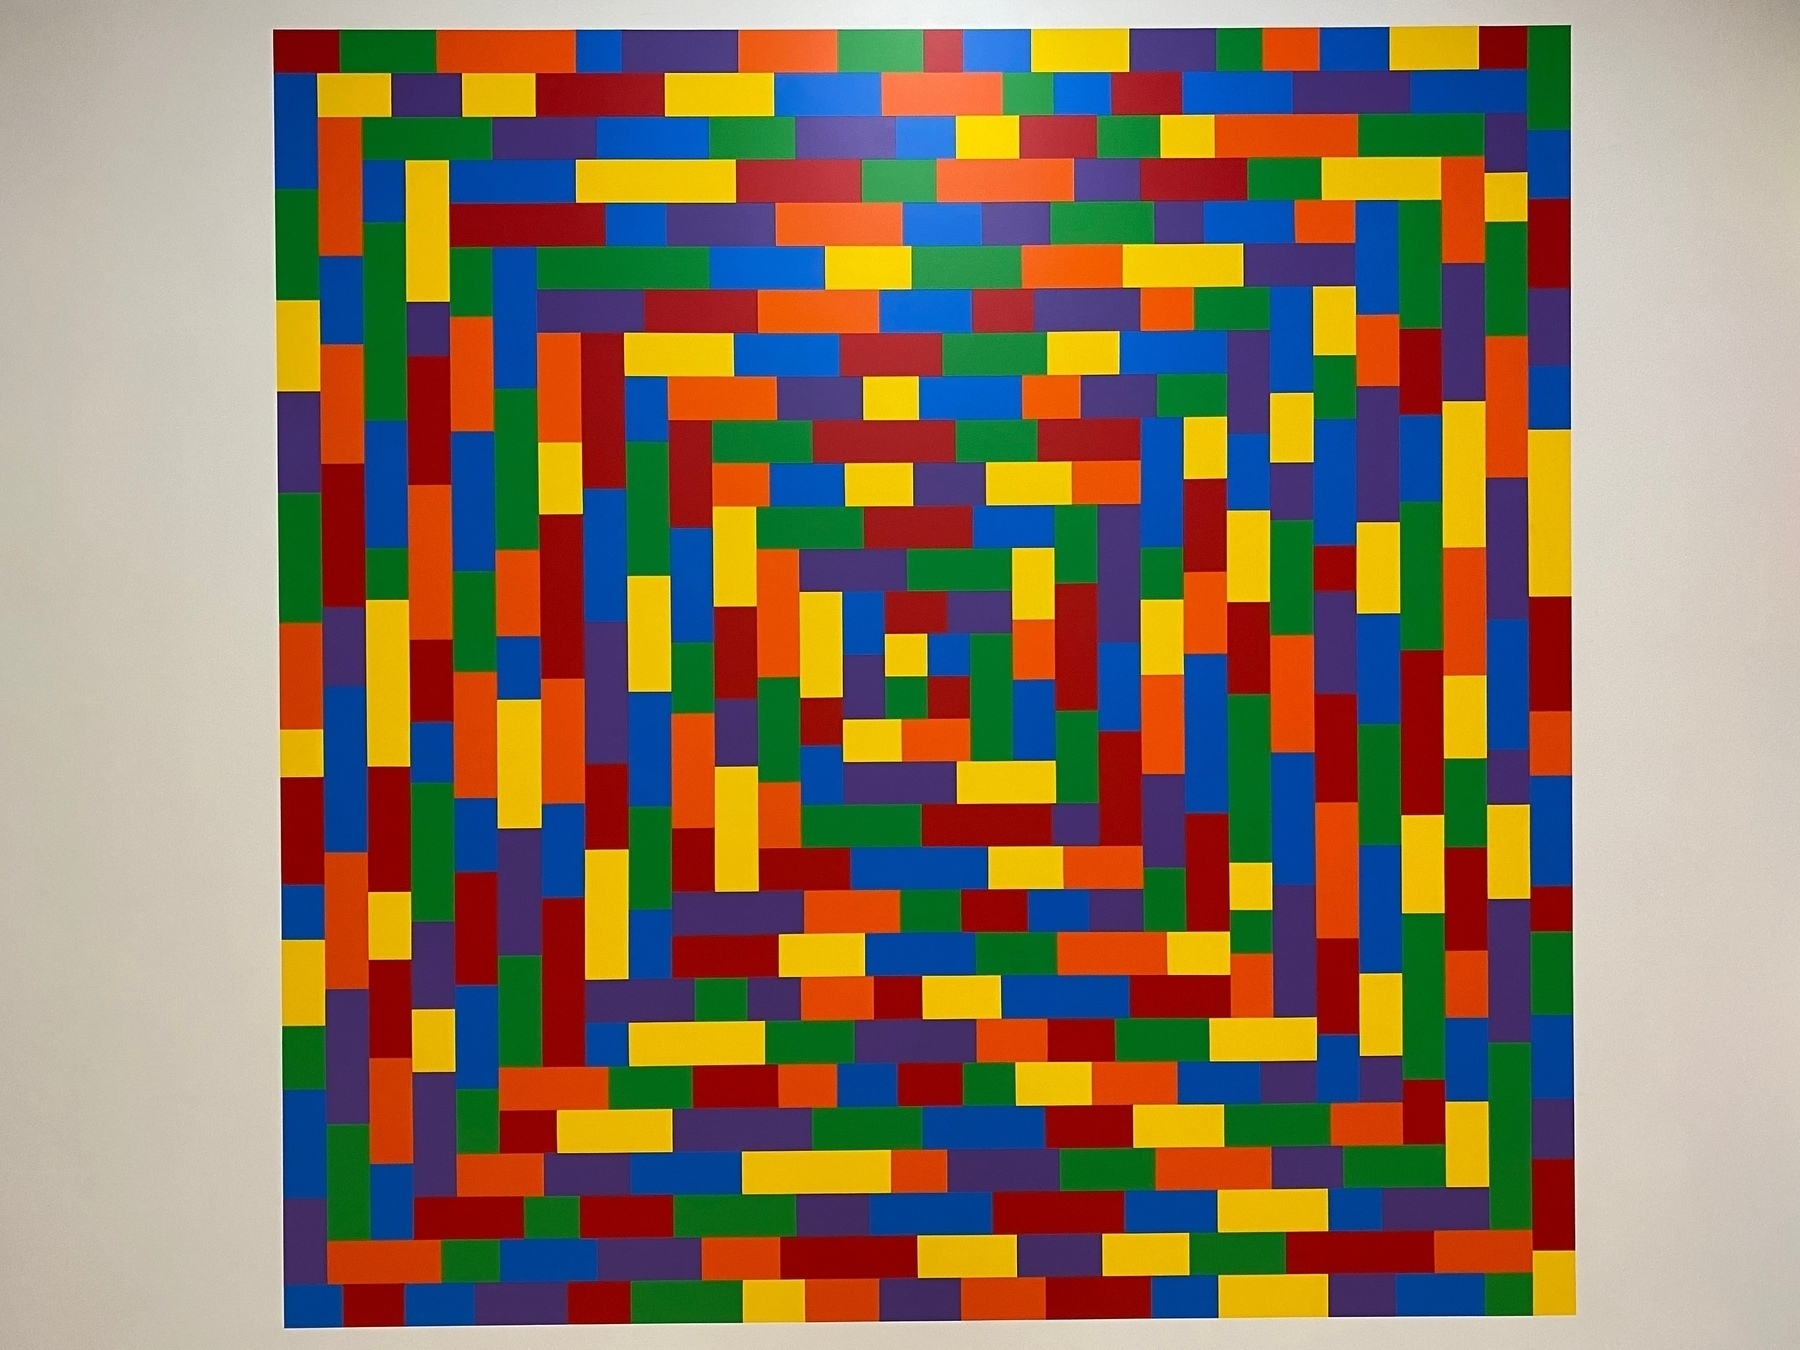 Painting of many brightly colored rectangles in a rectangular arrangement.